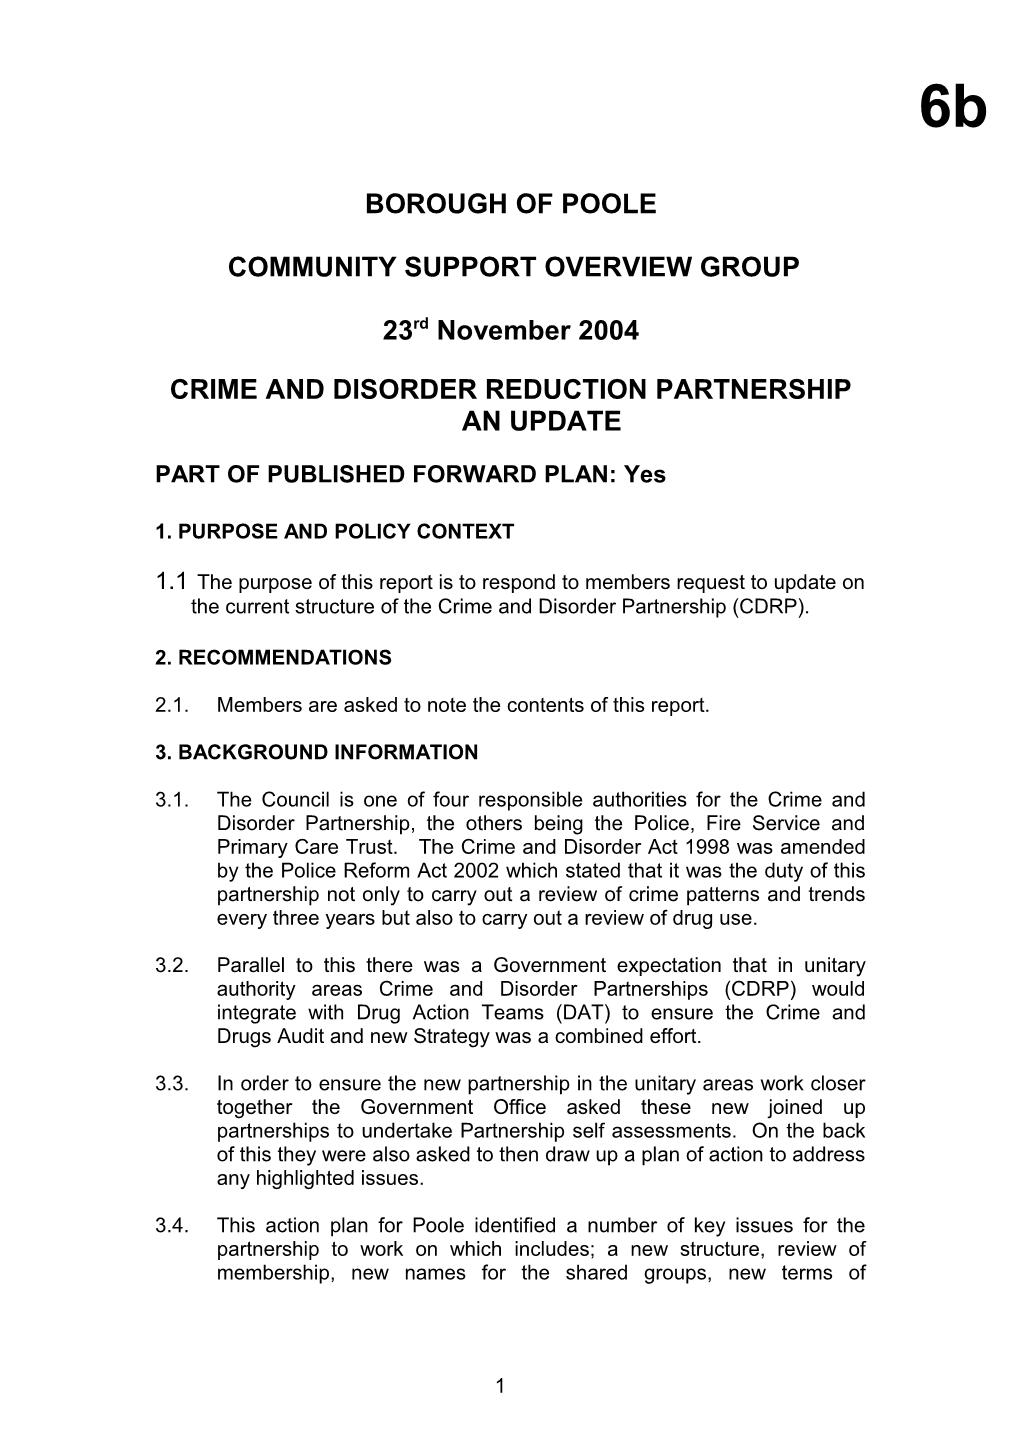 Crime and Disorder Reduction Partnership an Update